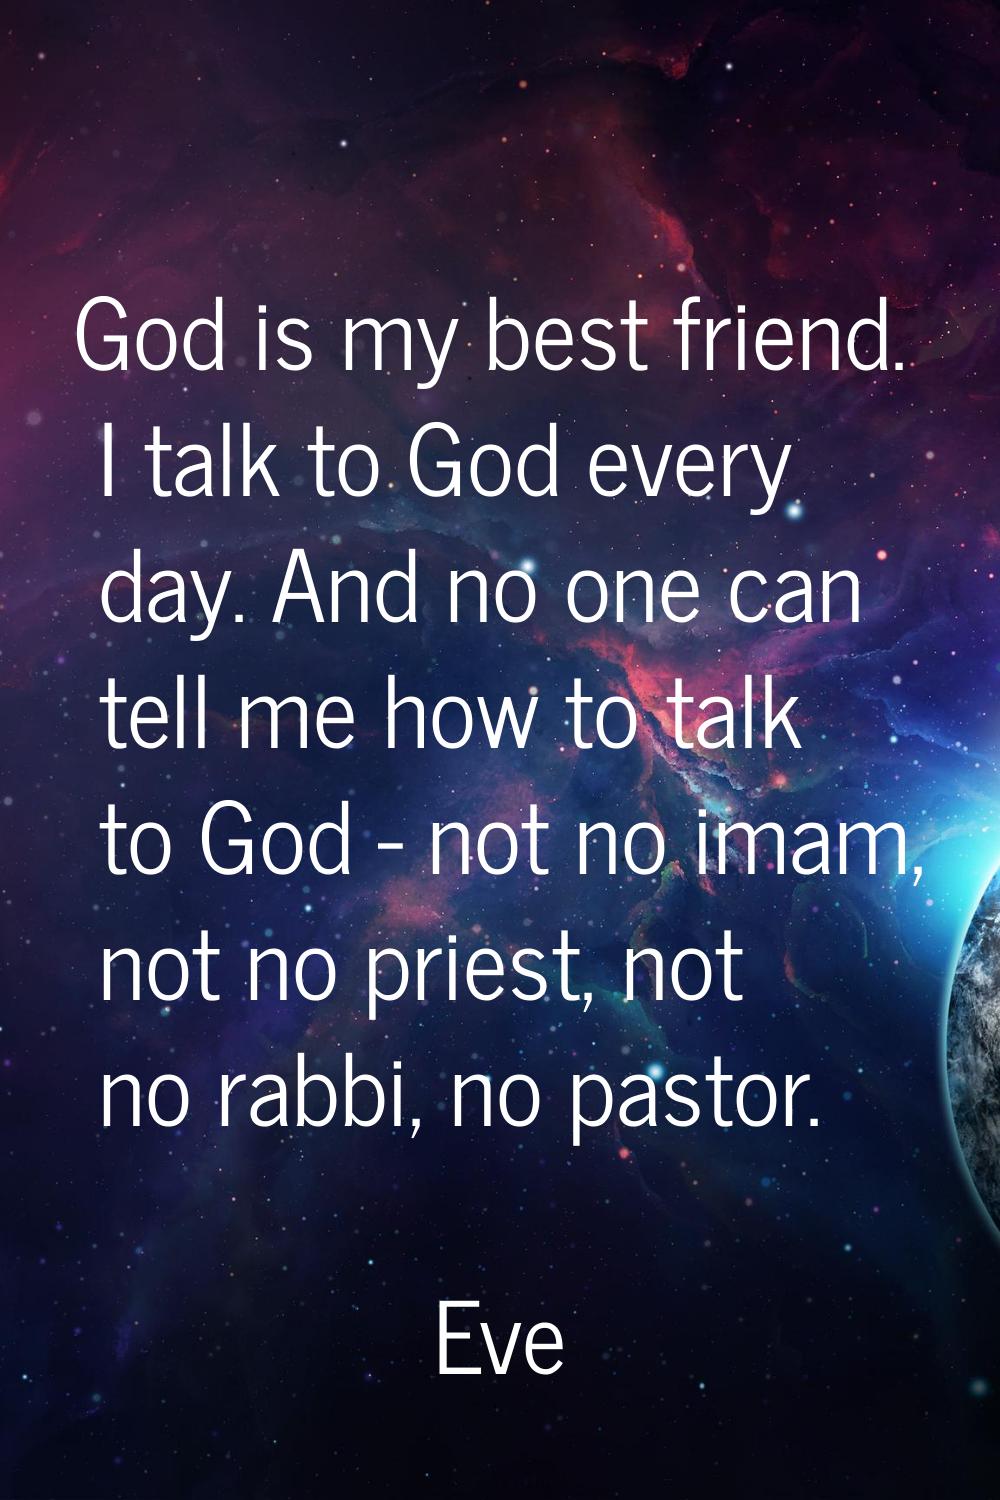 God is my best friend. I talk to God every day. And no one can tell me how to talk to God - not no 